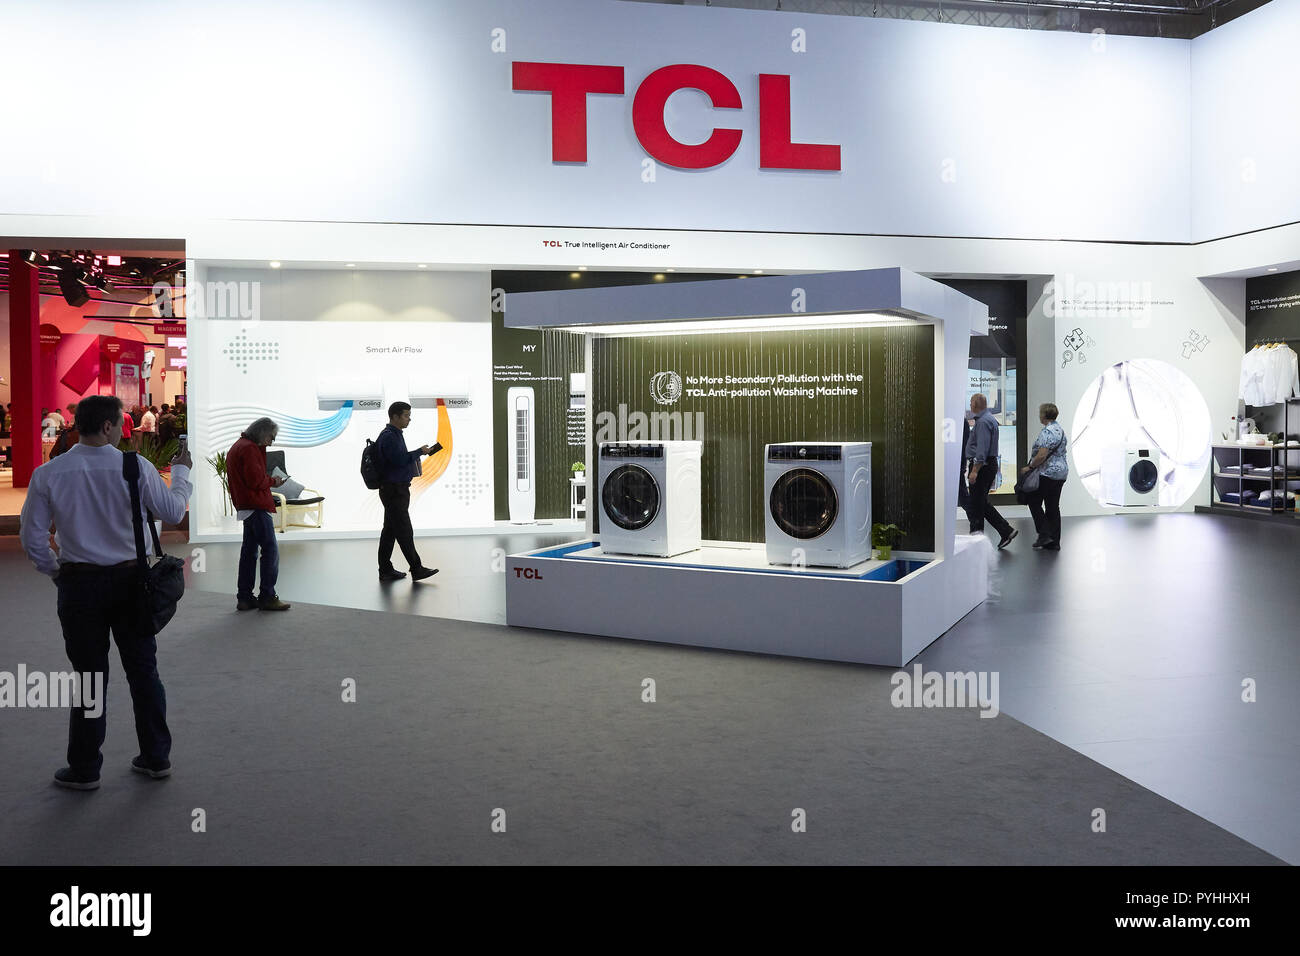 Berlin, Germany - TCL, the Chinese company, will be presenting its laundry care and washing machine innovations at IFA 2018. Stock Photo